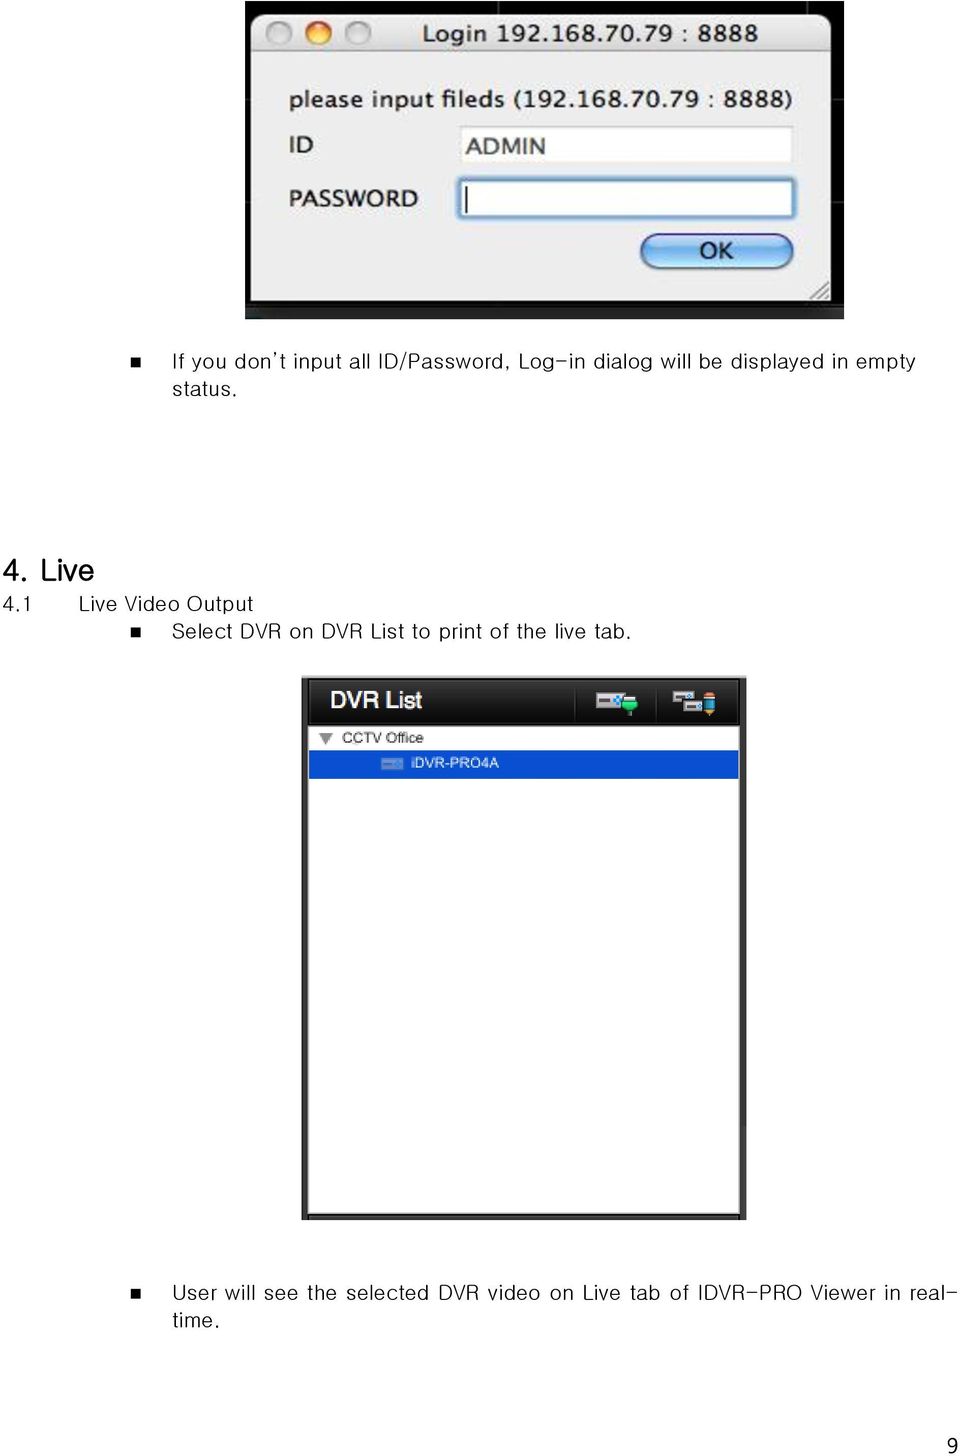 1 Live Video Output Select DVR on DVR List to print of the